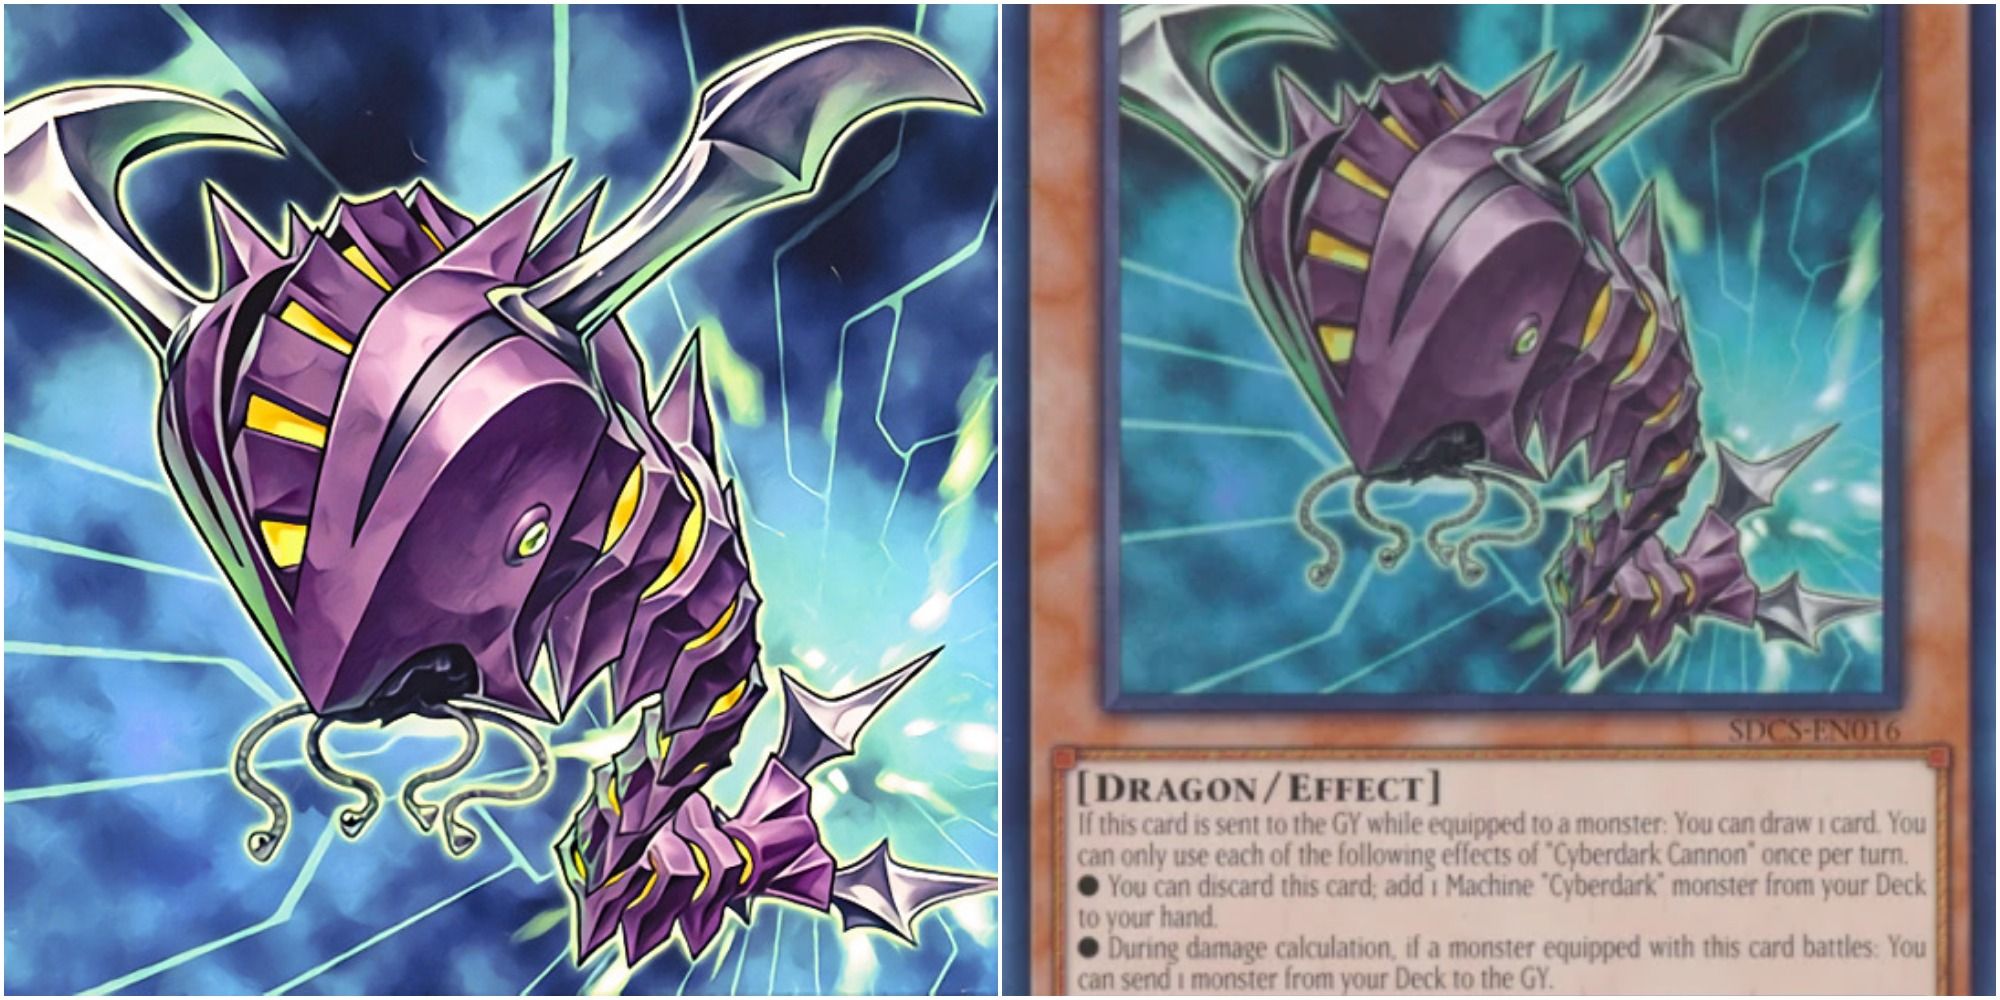 yugioh Cyberdark Cannon card art and text